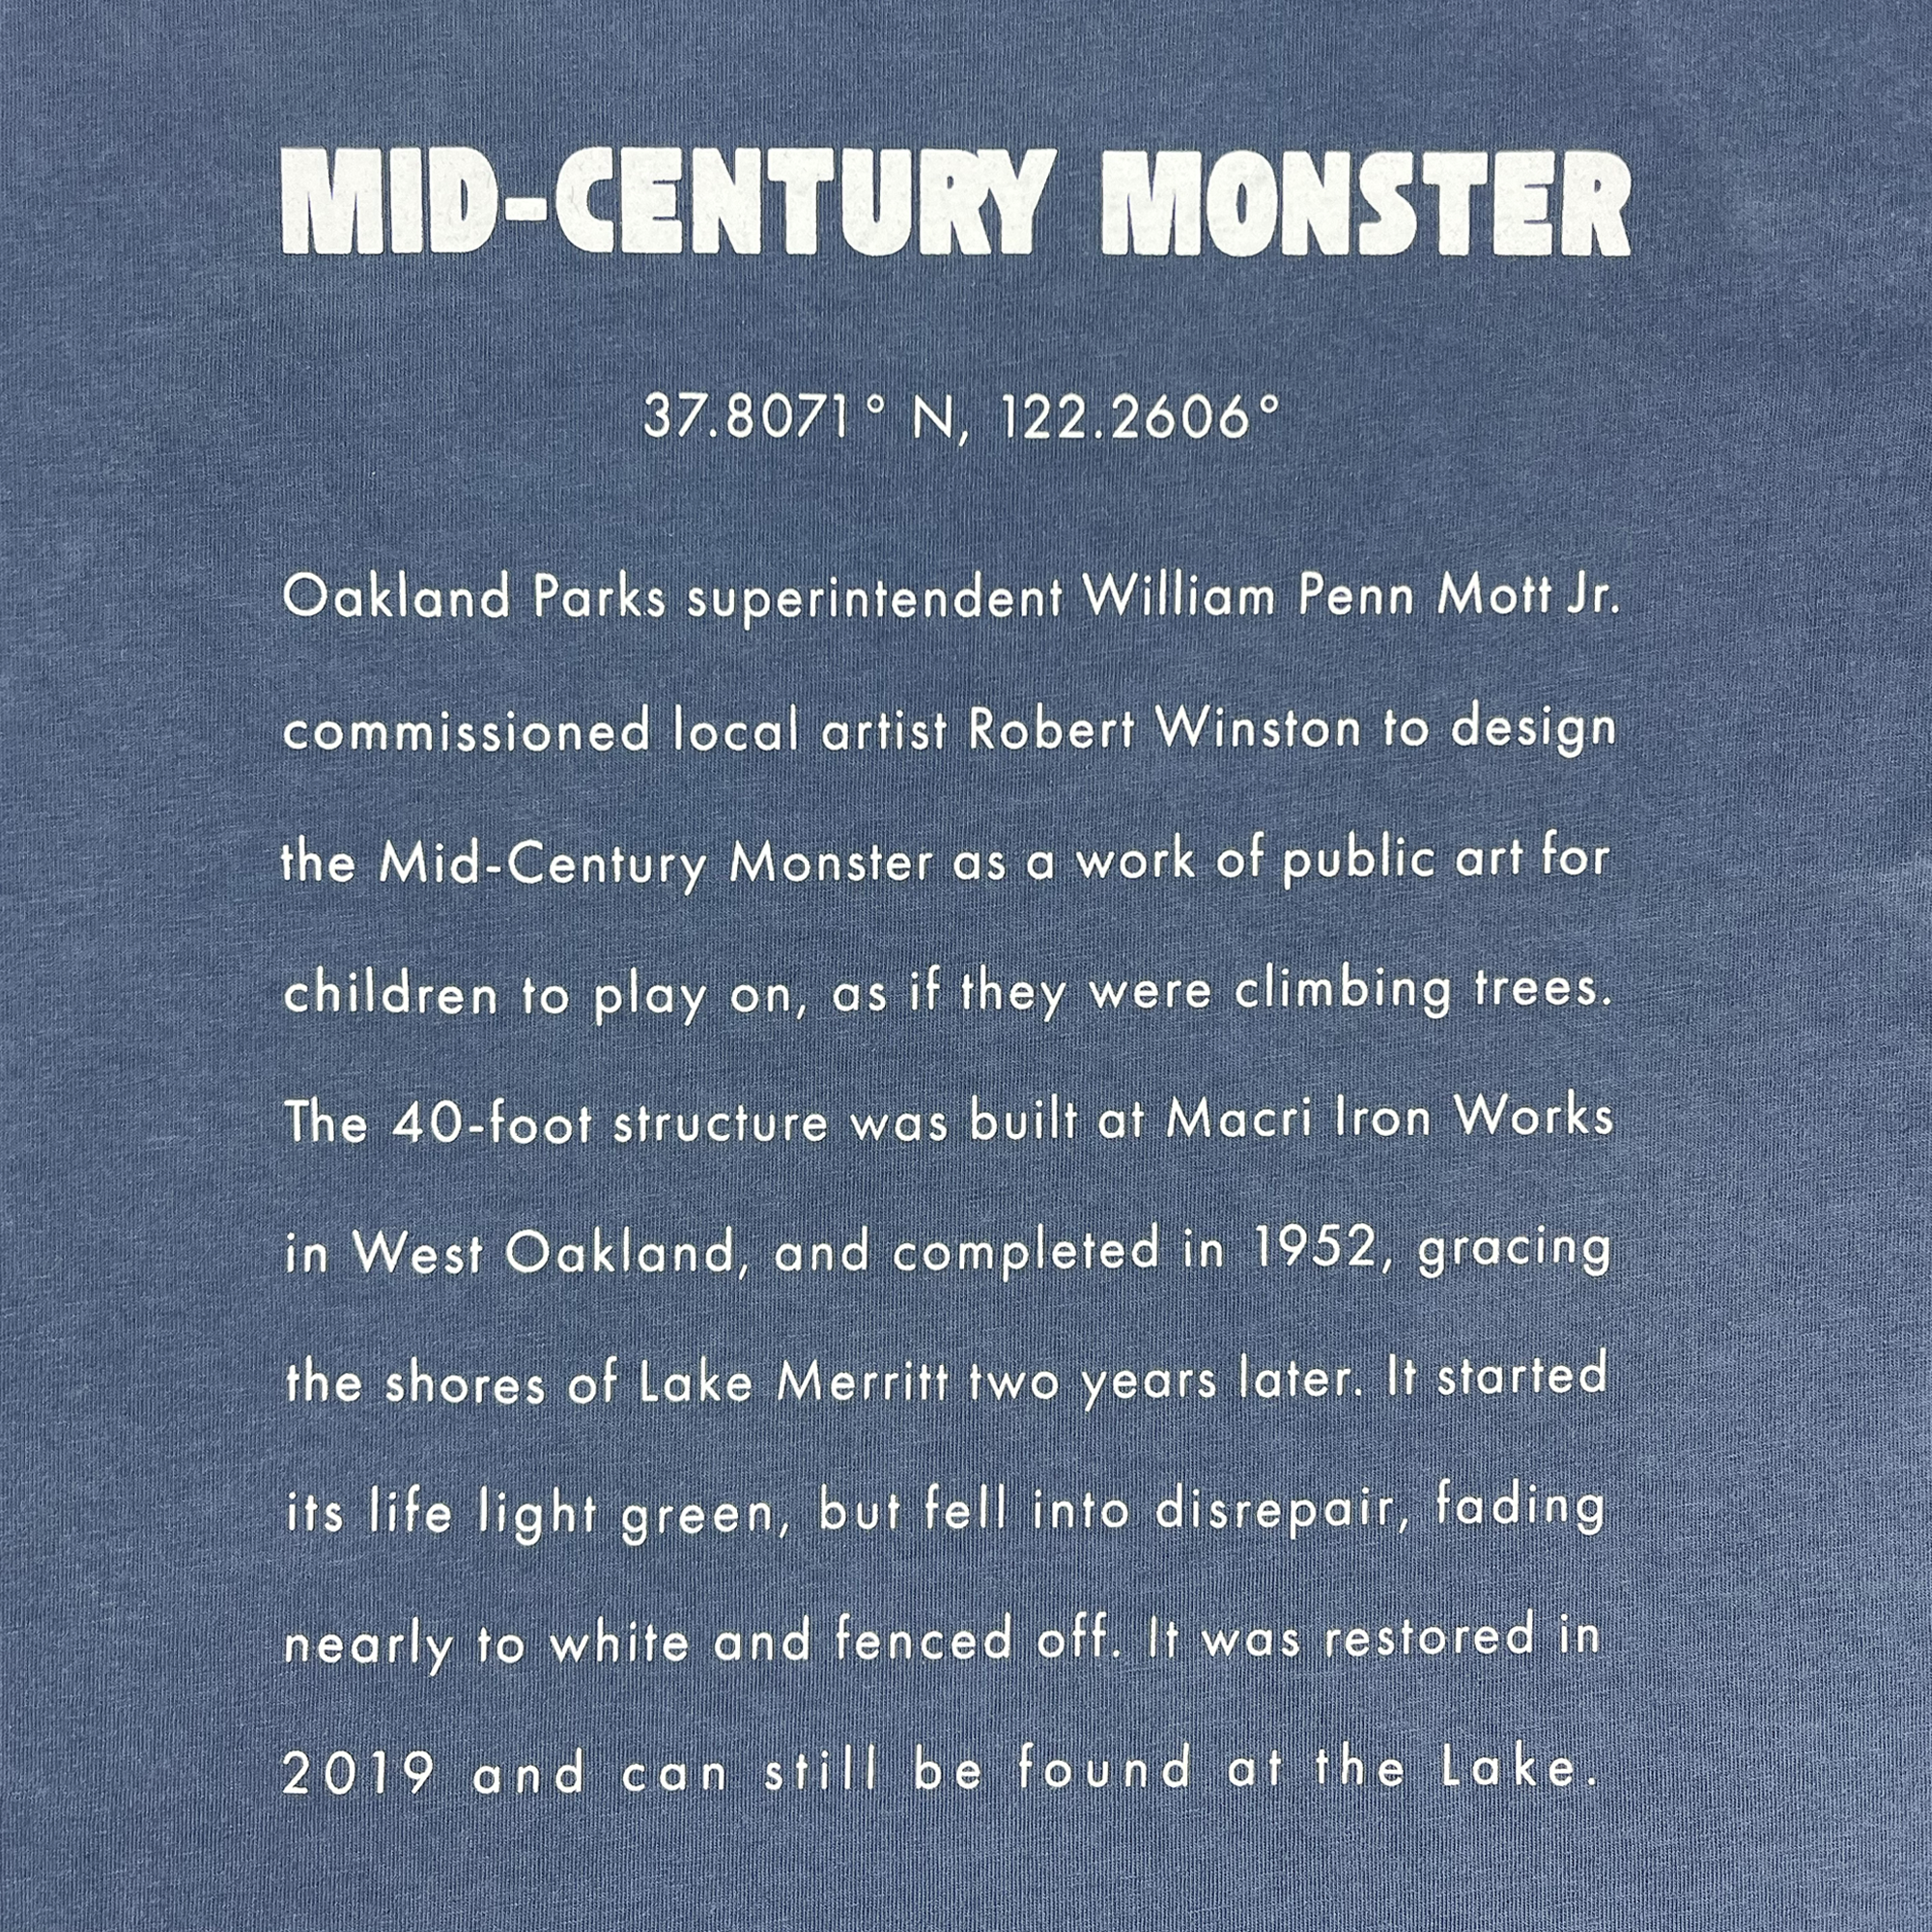 Detailed close-up long-form text explaining the history of the mid-century monster structure at Oaklands Marci Iron Works on the back of a faded blue women’s t-shirt.